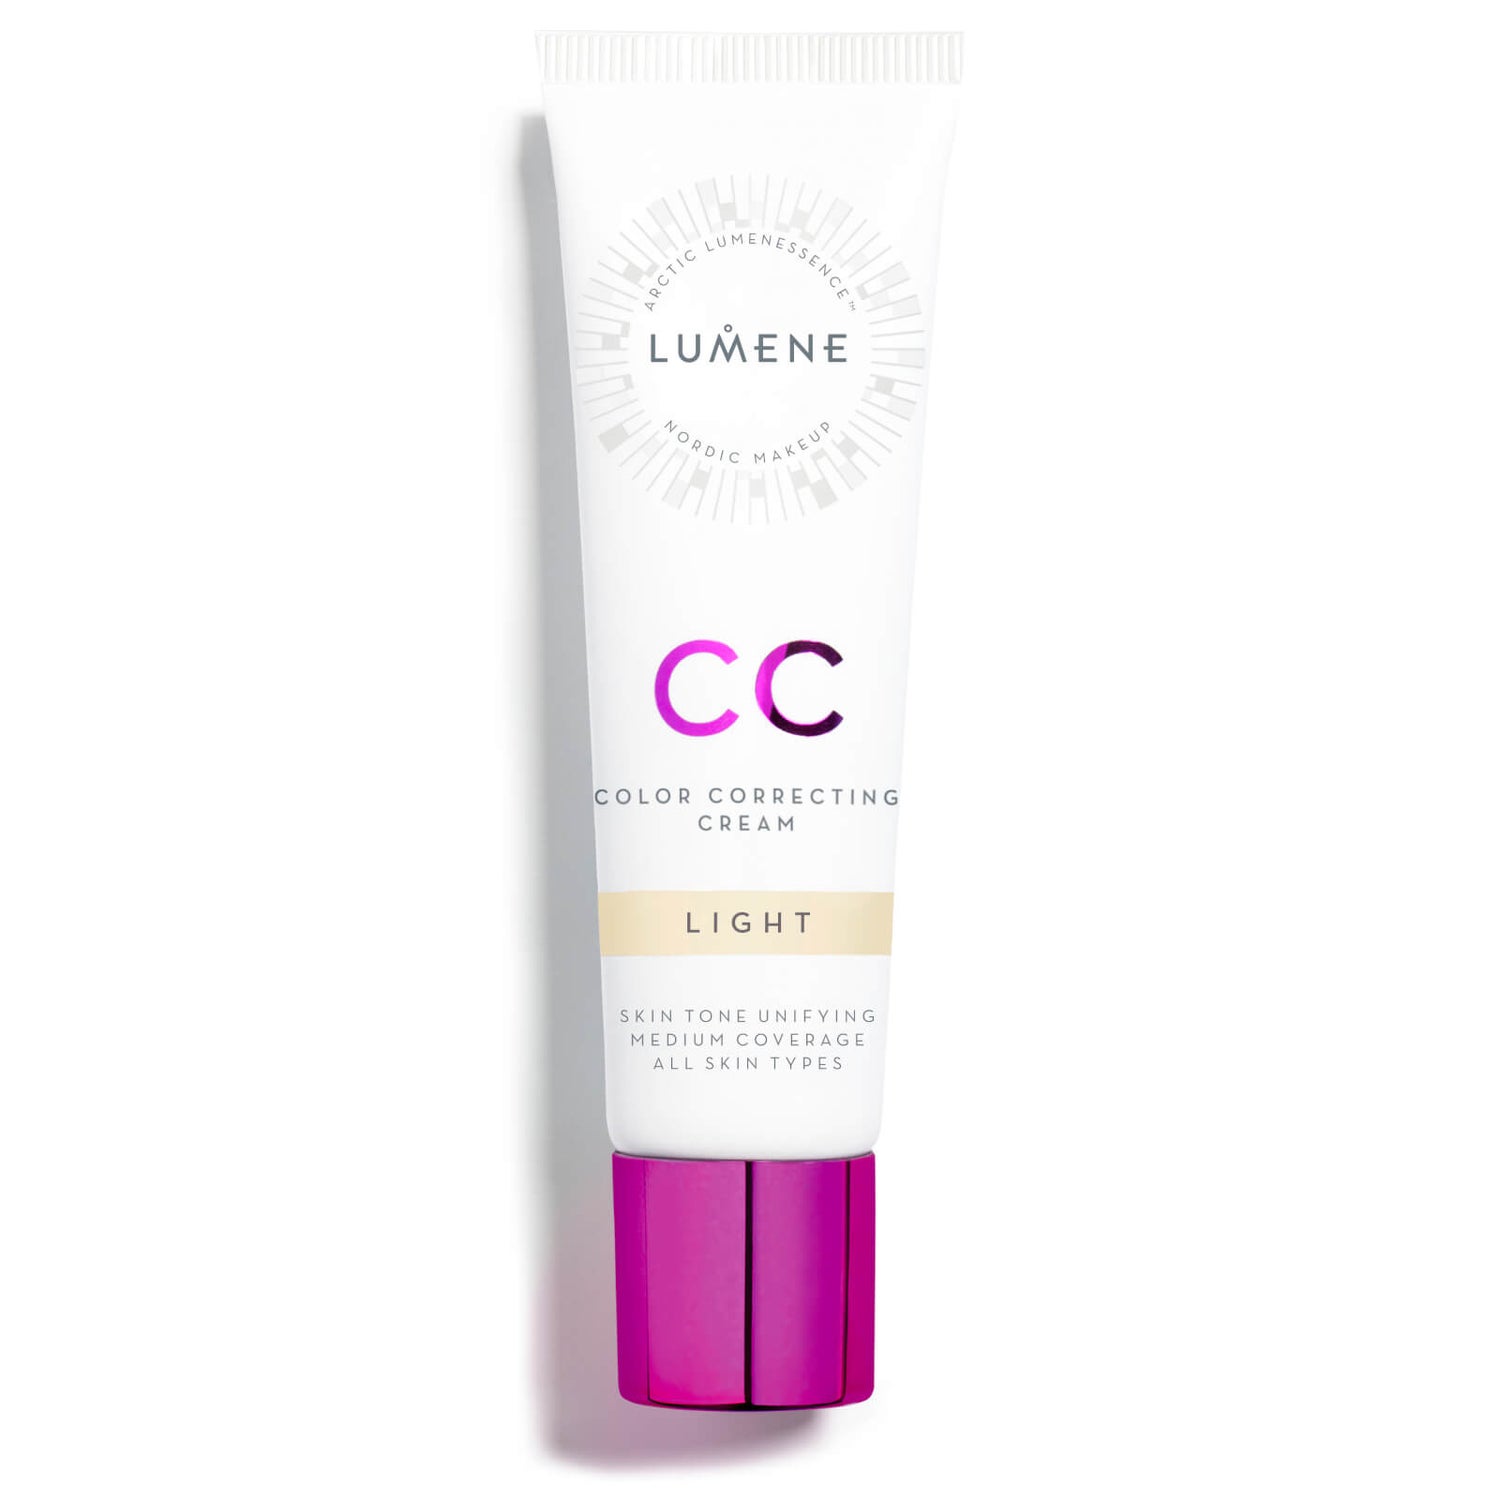 Youth Glow Vitamin C CC Cream SPF50 by PURLISSE BEAUTY, Color, Complexion, BB/CC/Tinted Moisturizer